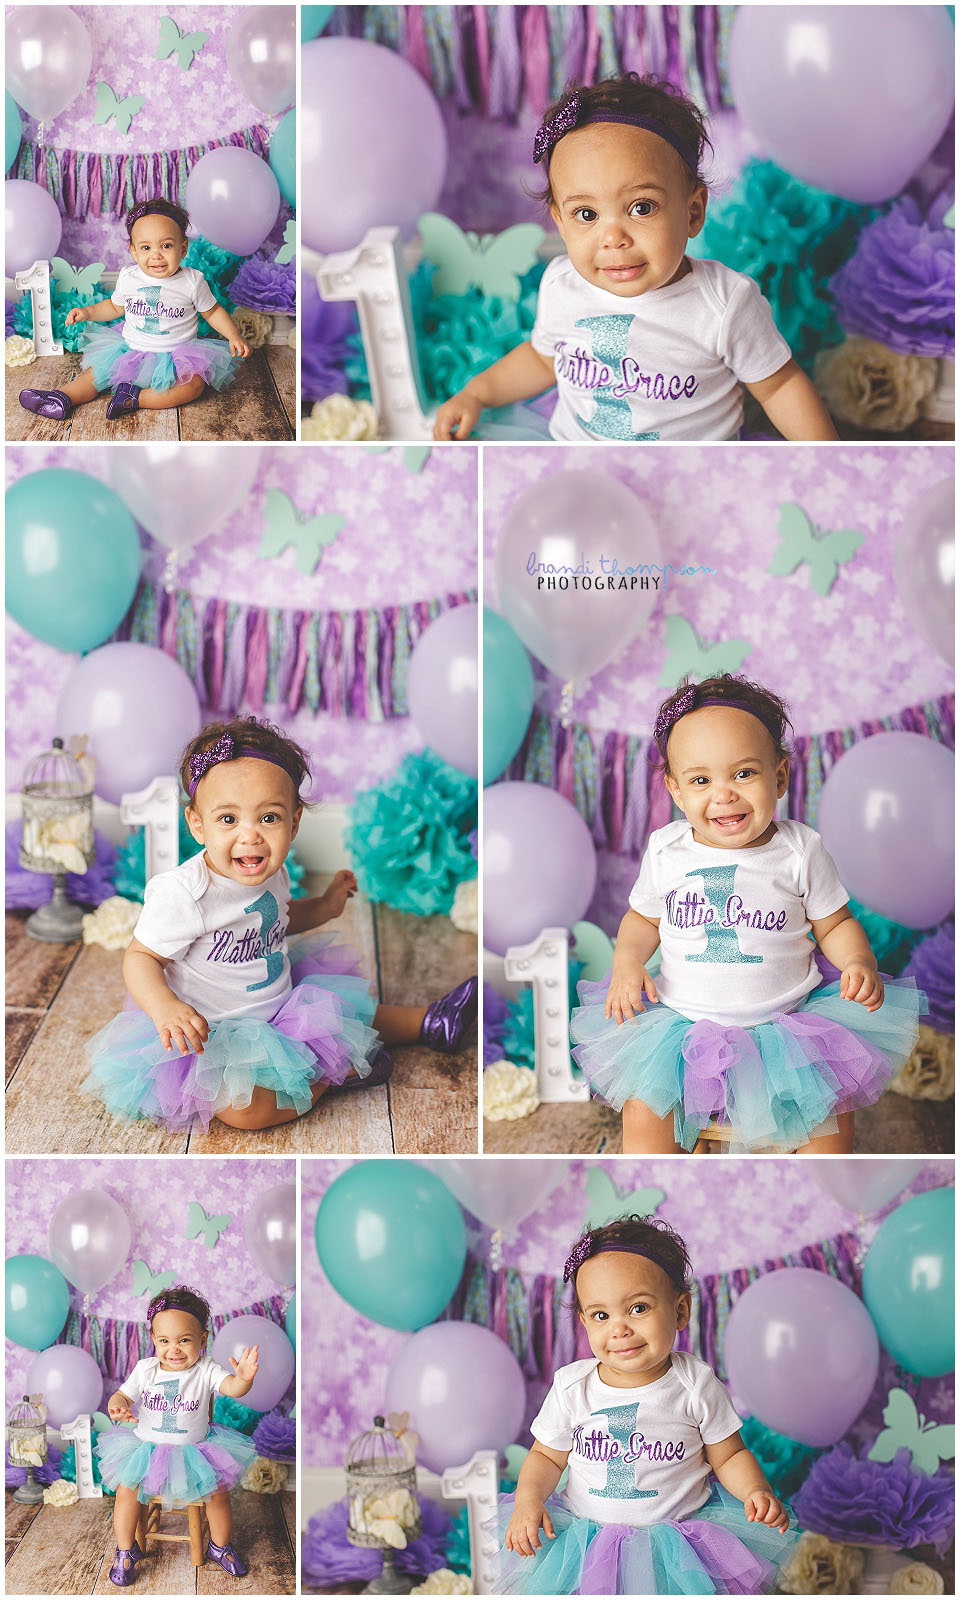 purple and teal butterfly cake smash theme for a baby girl in a plano,tx studio